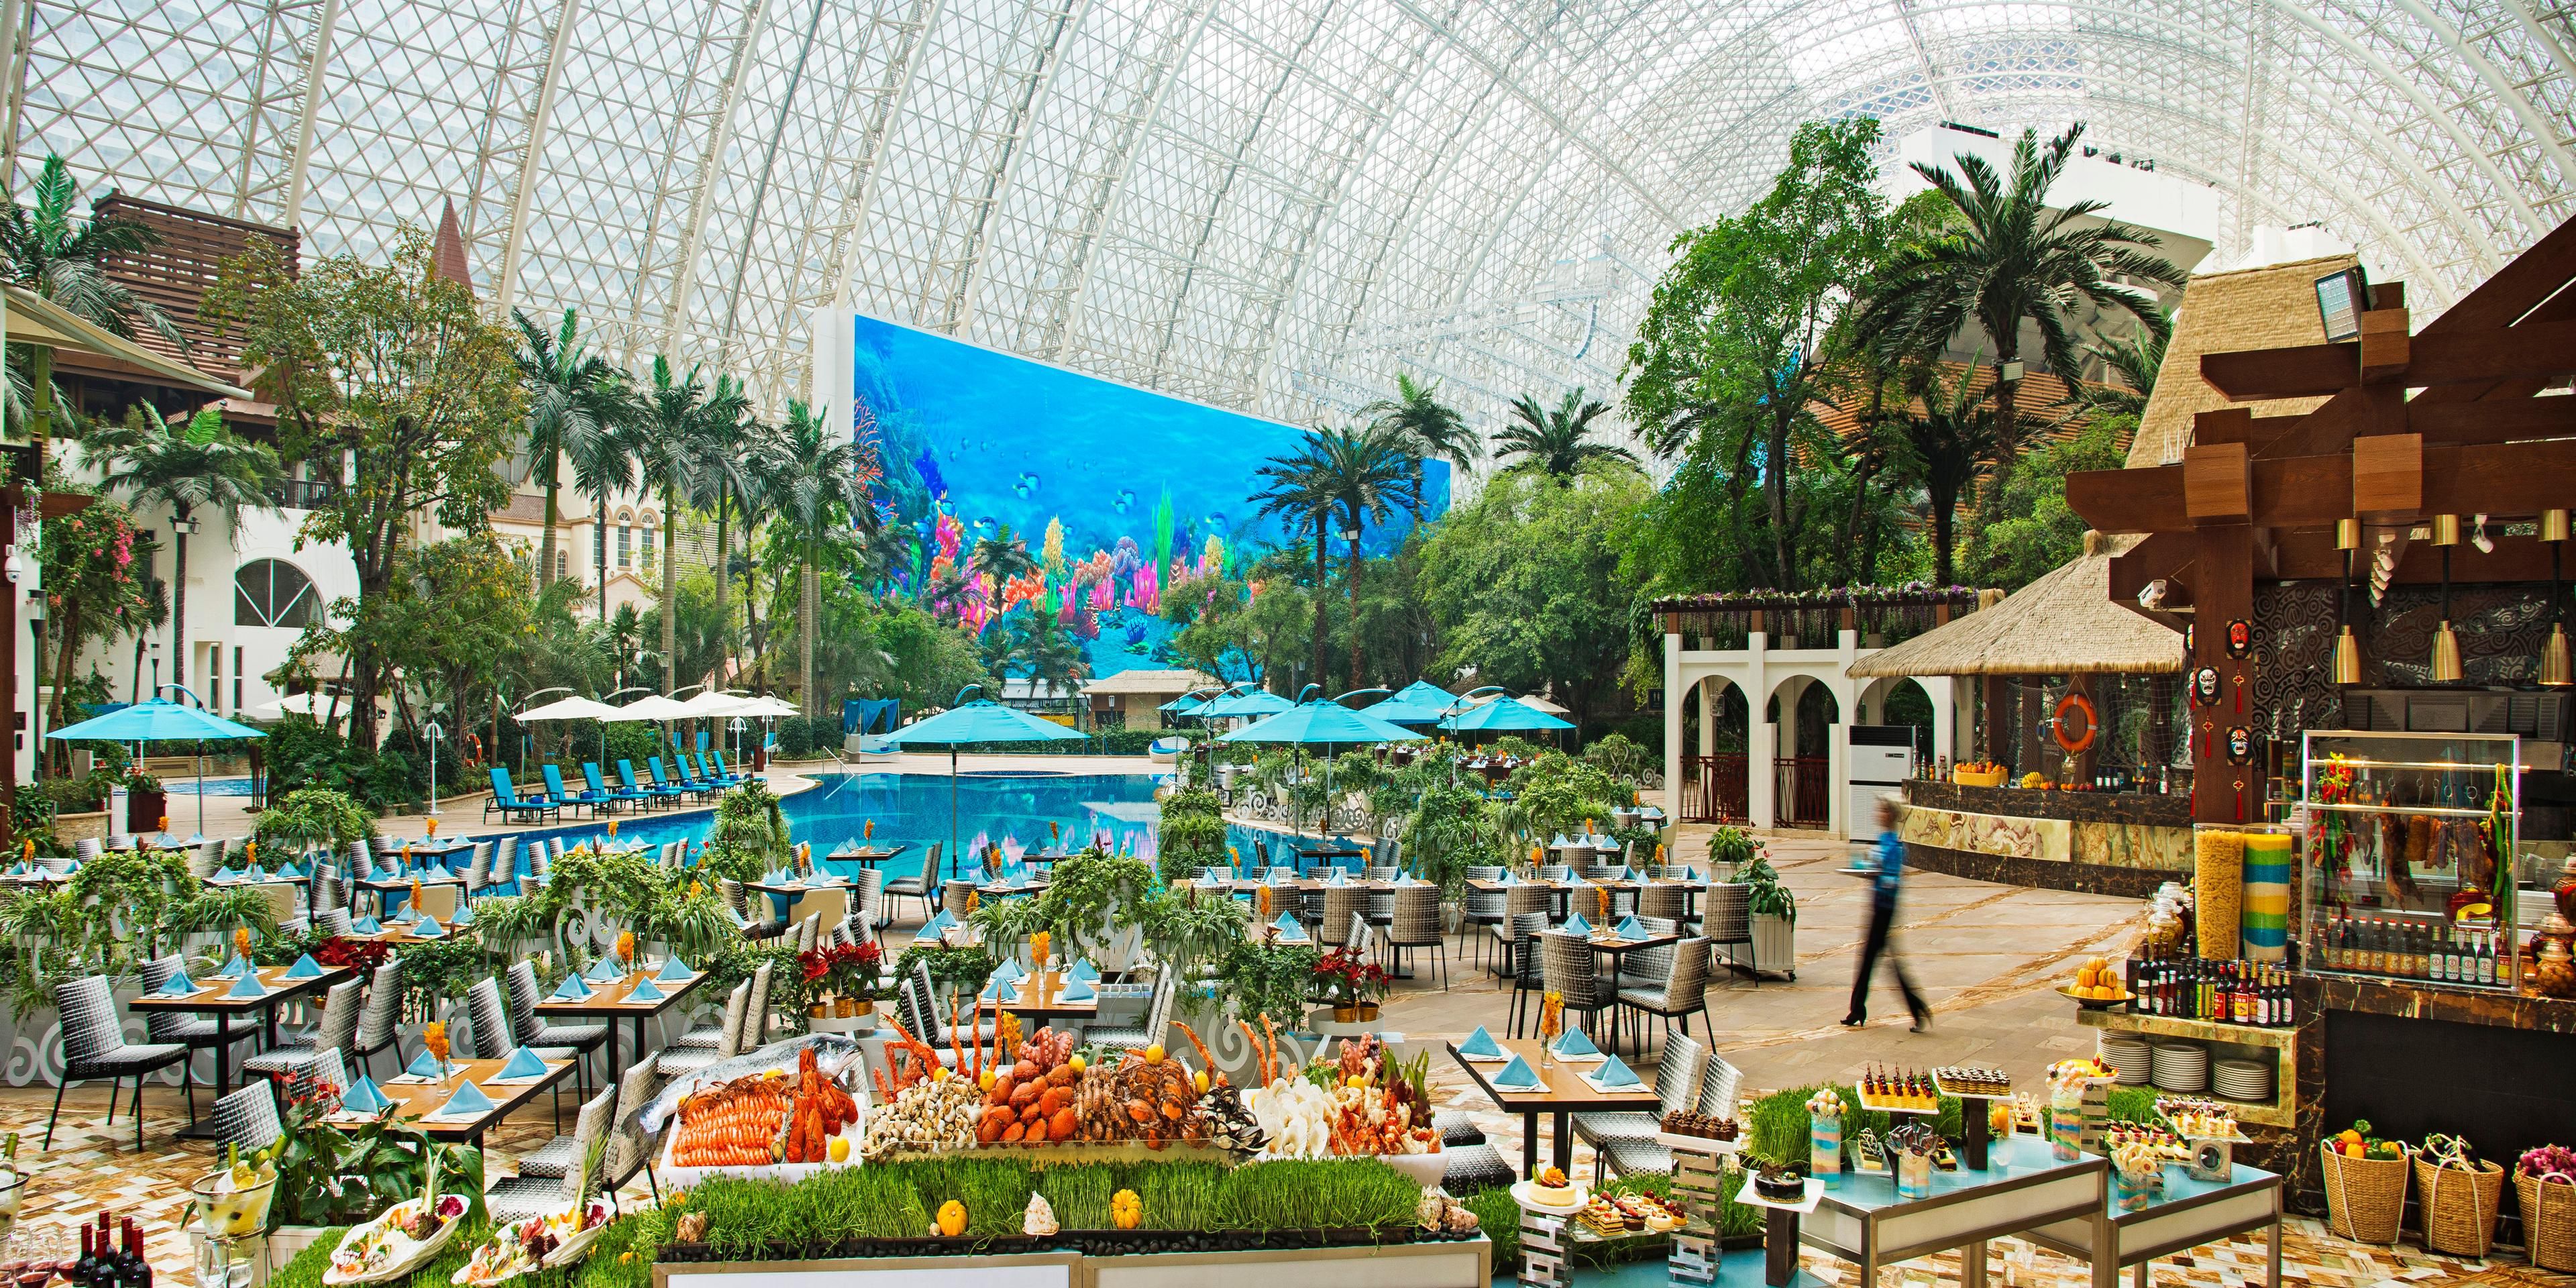 Paradise Island poolside Western Restaurant serves delicious international buffets and all-day A la carte dishes